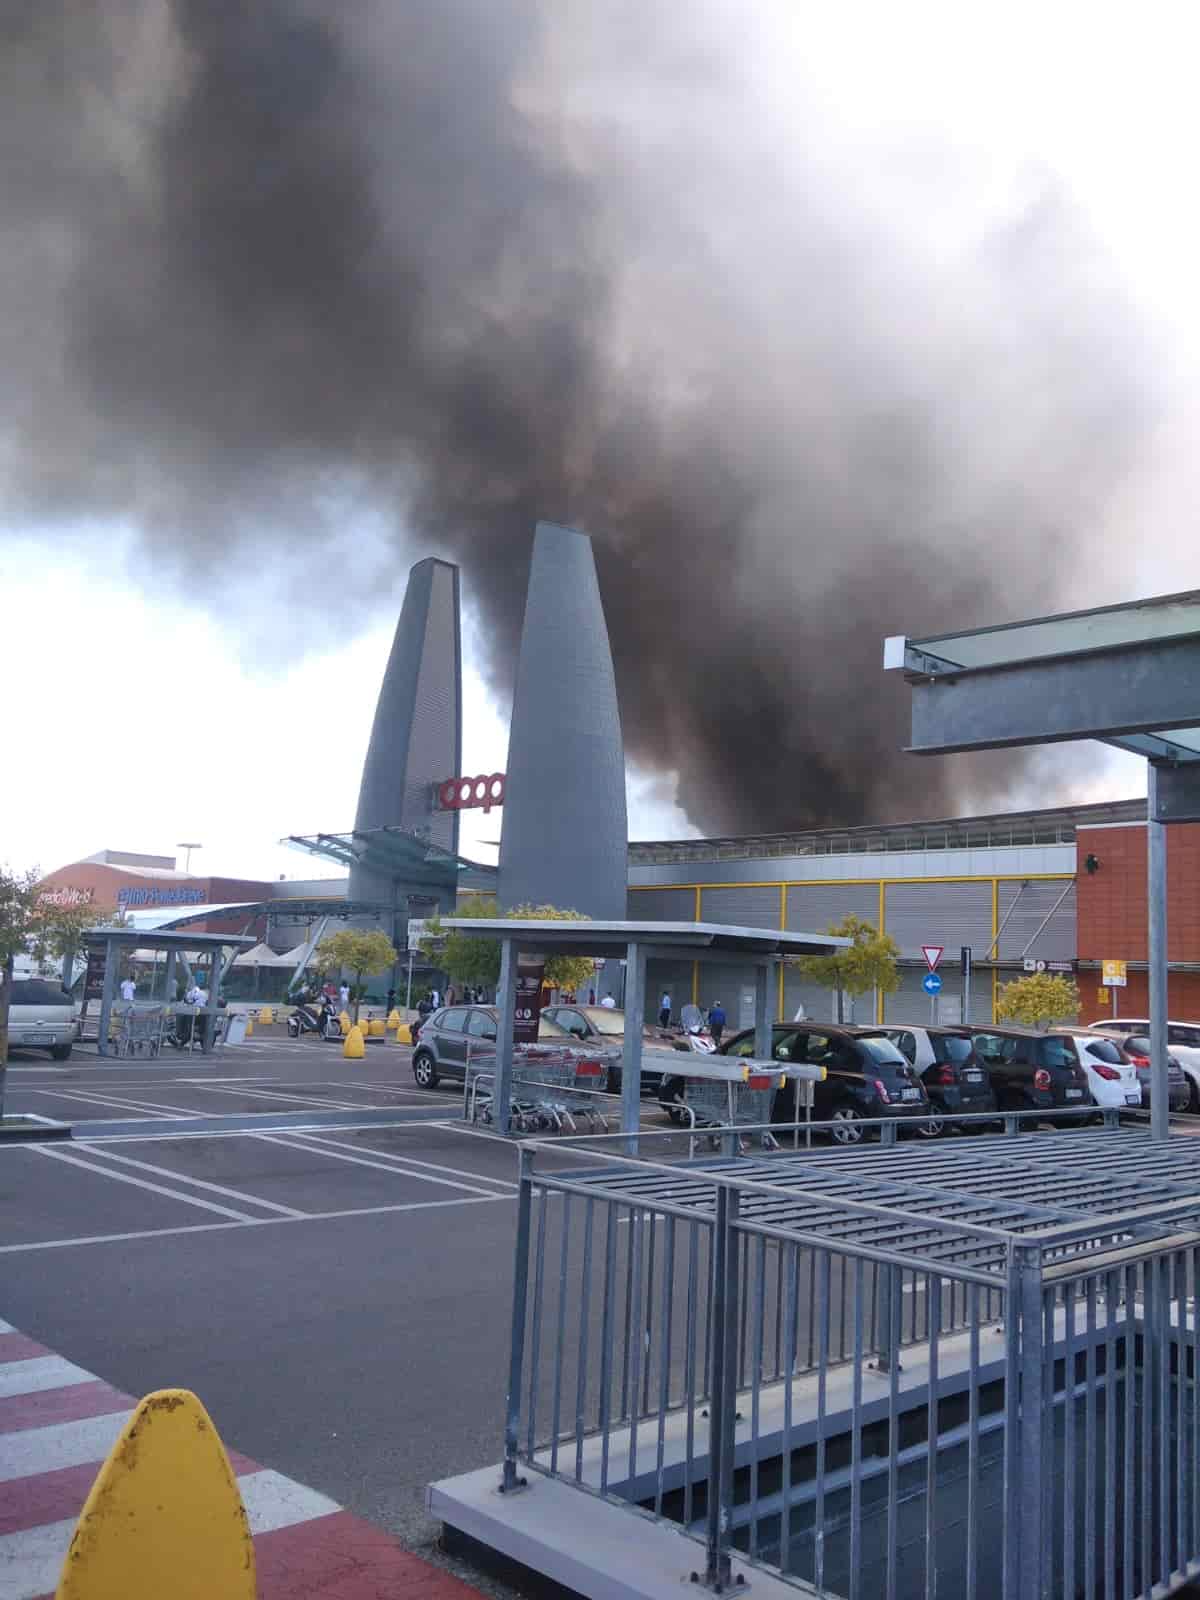 coop ponte a greve fiamme